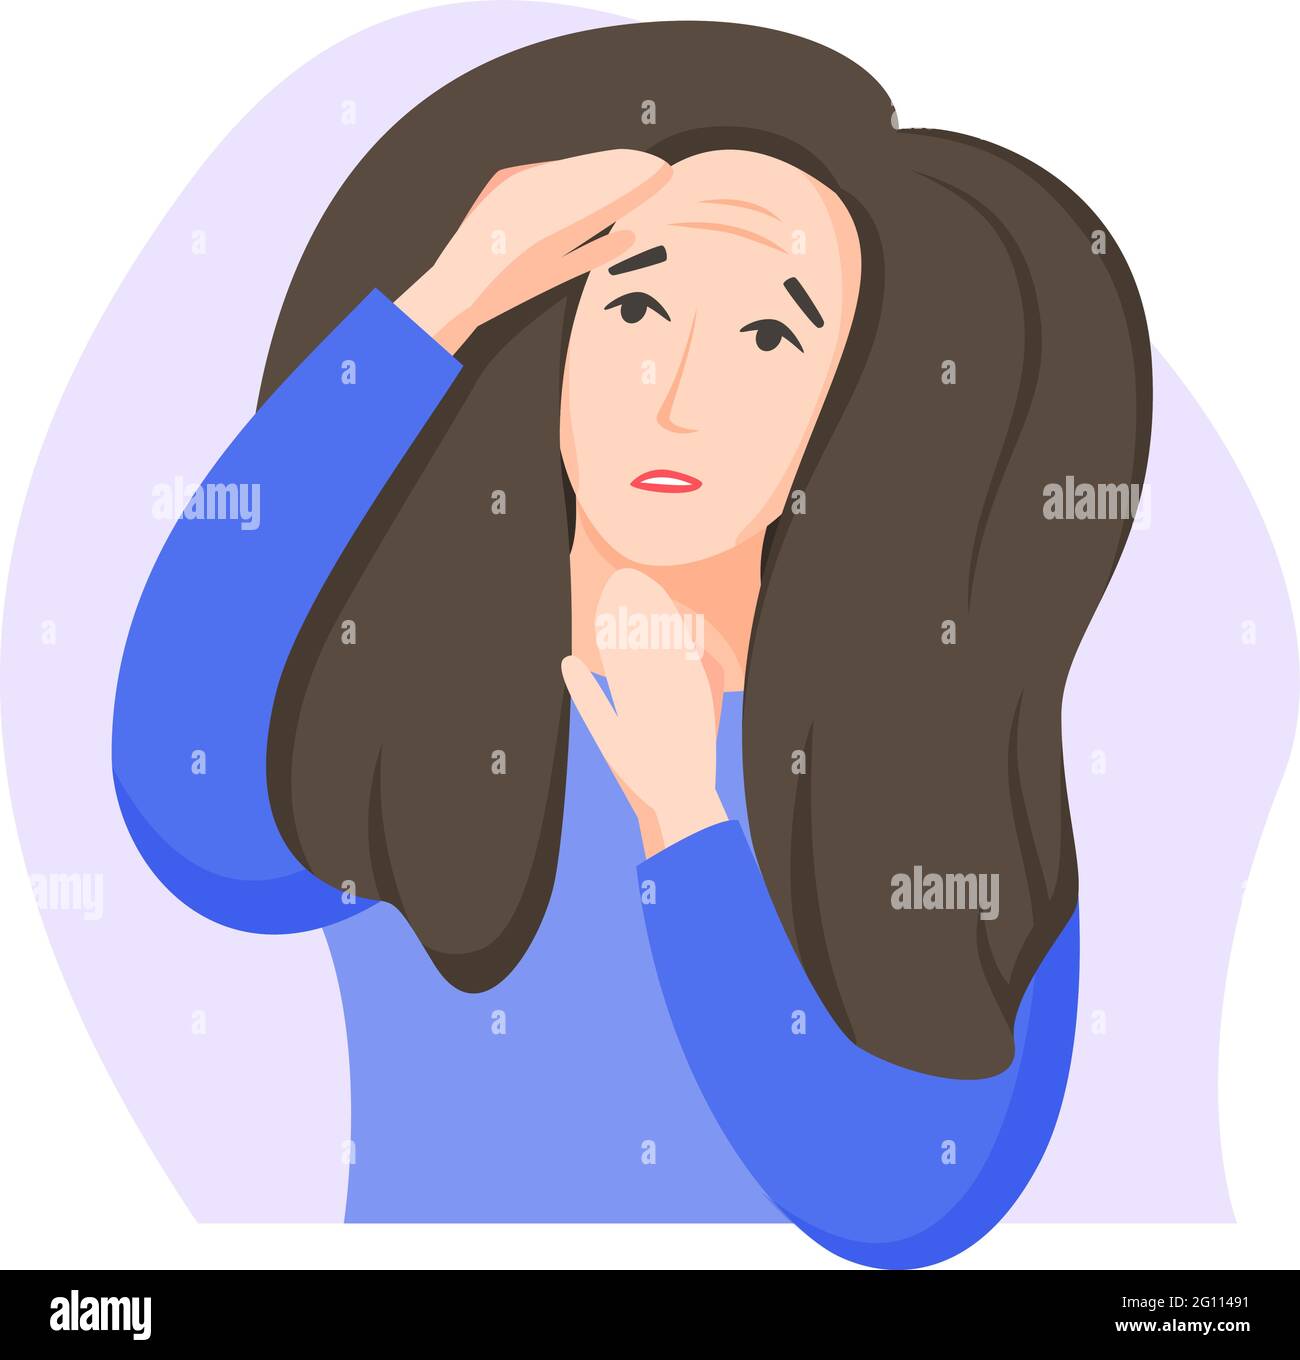 Woman found first wrinkles, worry about getting old, dissatisfaction with oneself, appearance-related social pressure and ageism issue, flat style. Ve Stock Vector